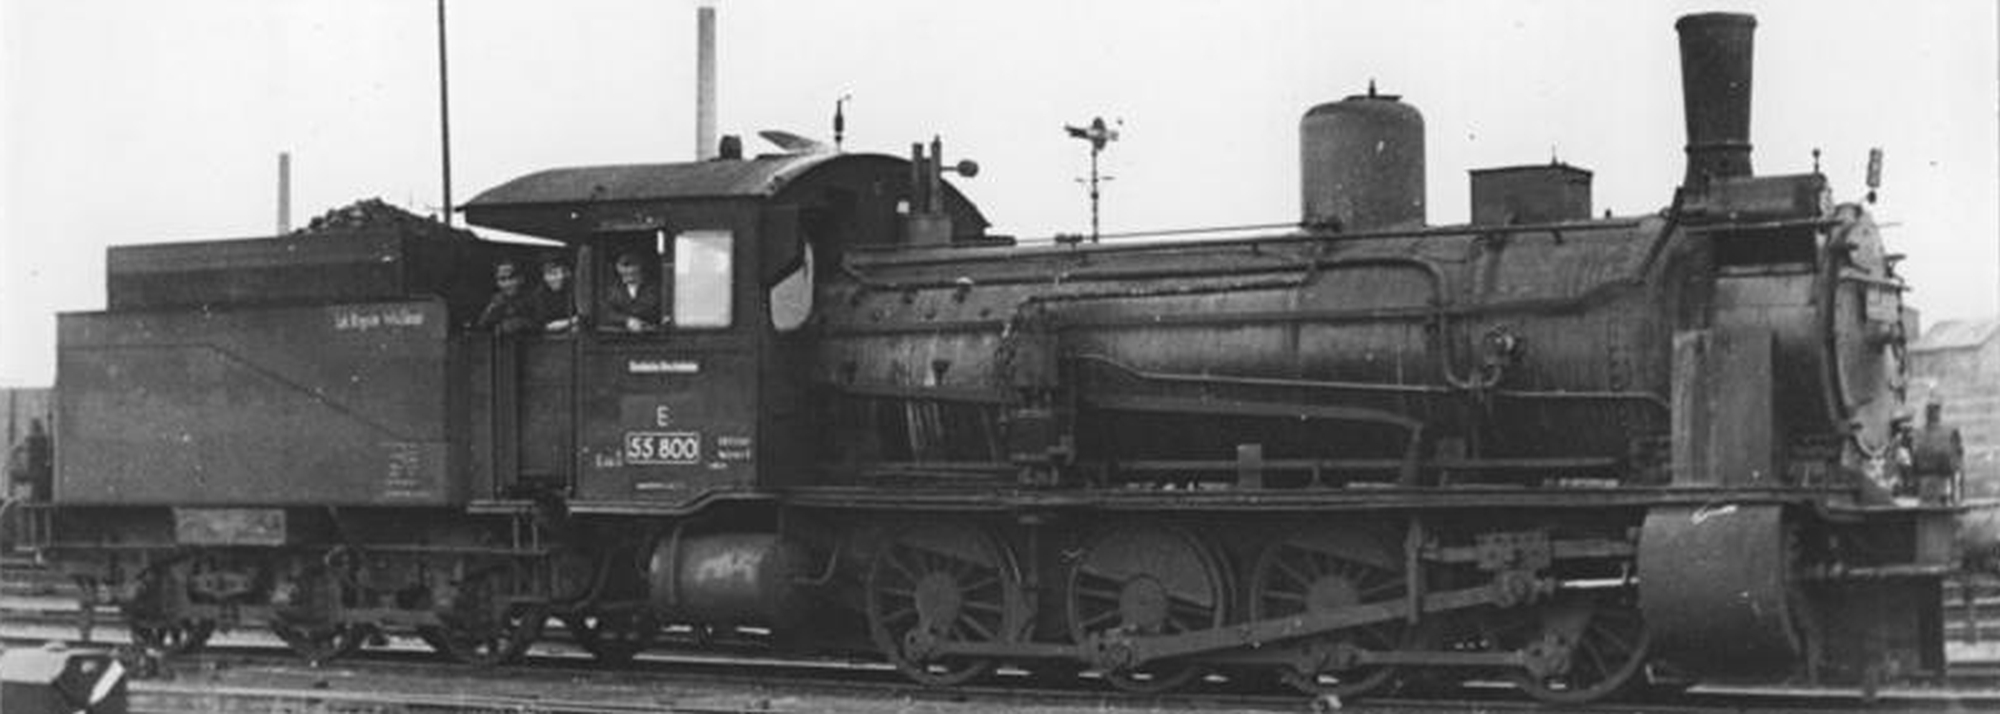 55 800 in the year 1953